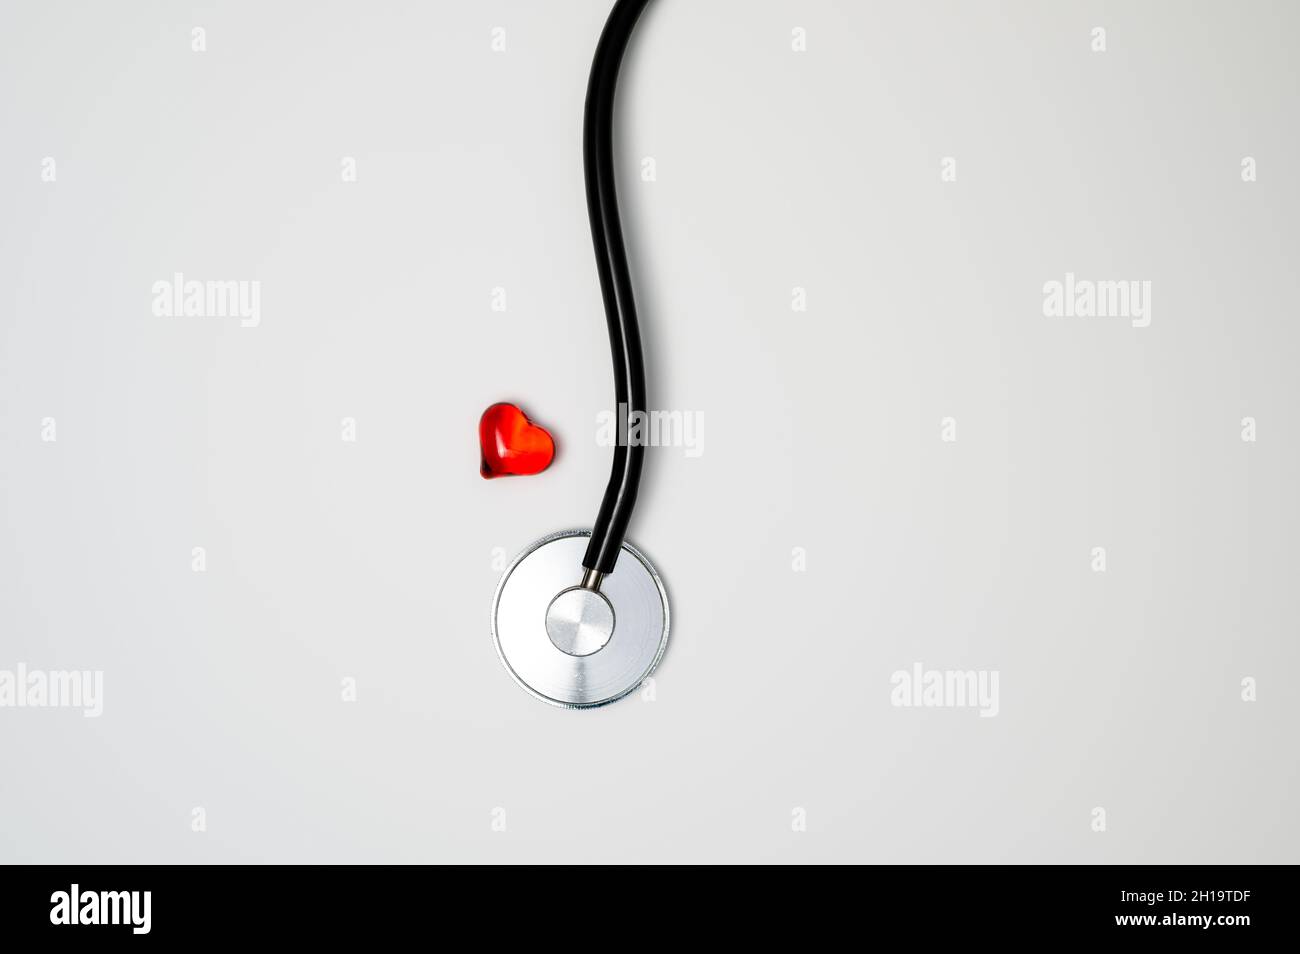 Health care or health check concept: red glass heart next to a medical stethoscope with chestpiece and tubing. Stock Photo